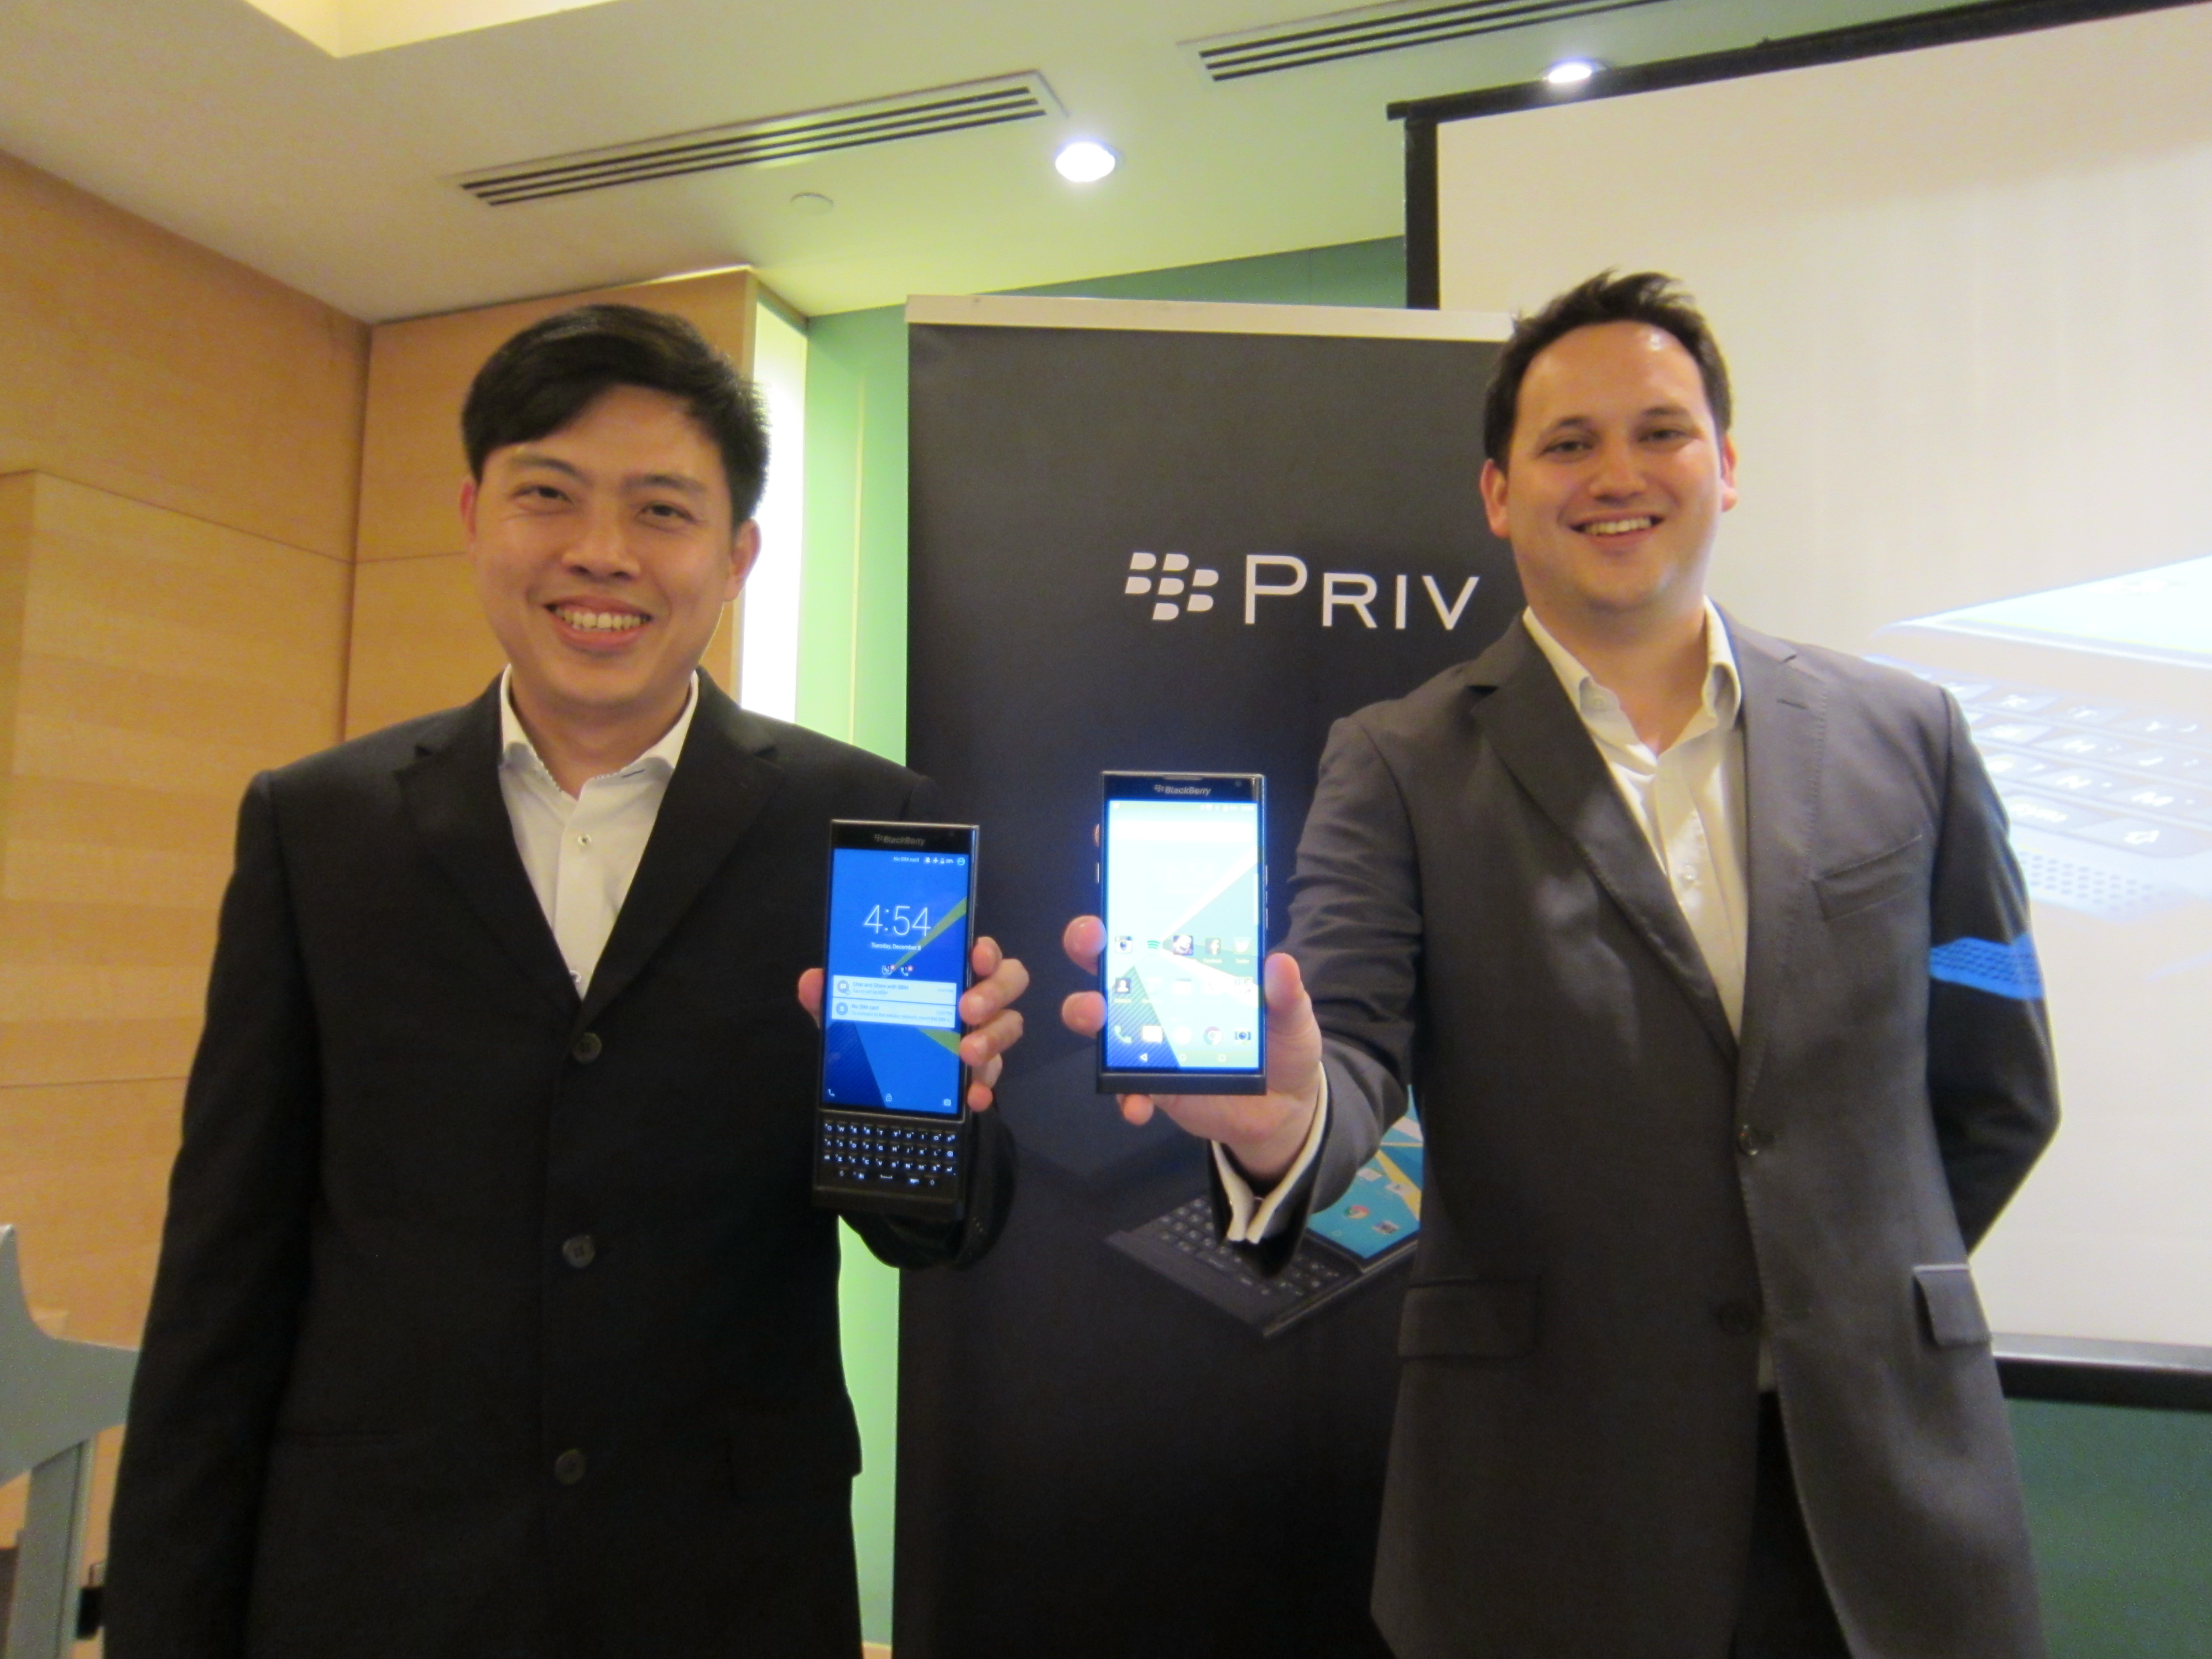 BlackBerry PRIV to be available in Malaysia on 15th December